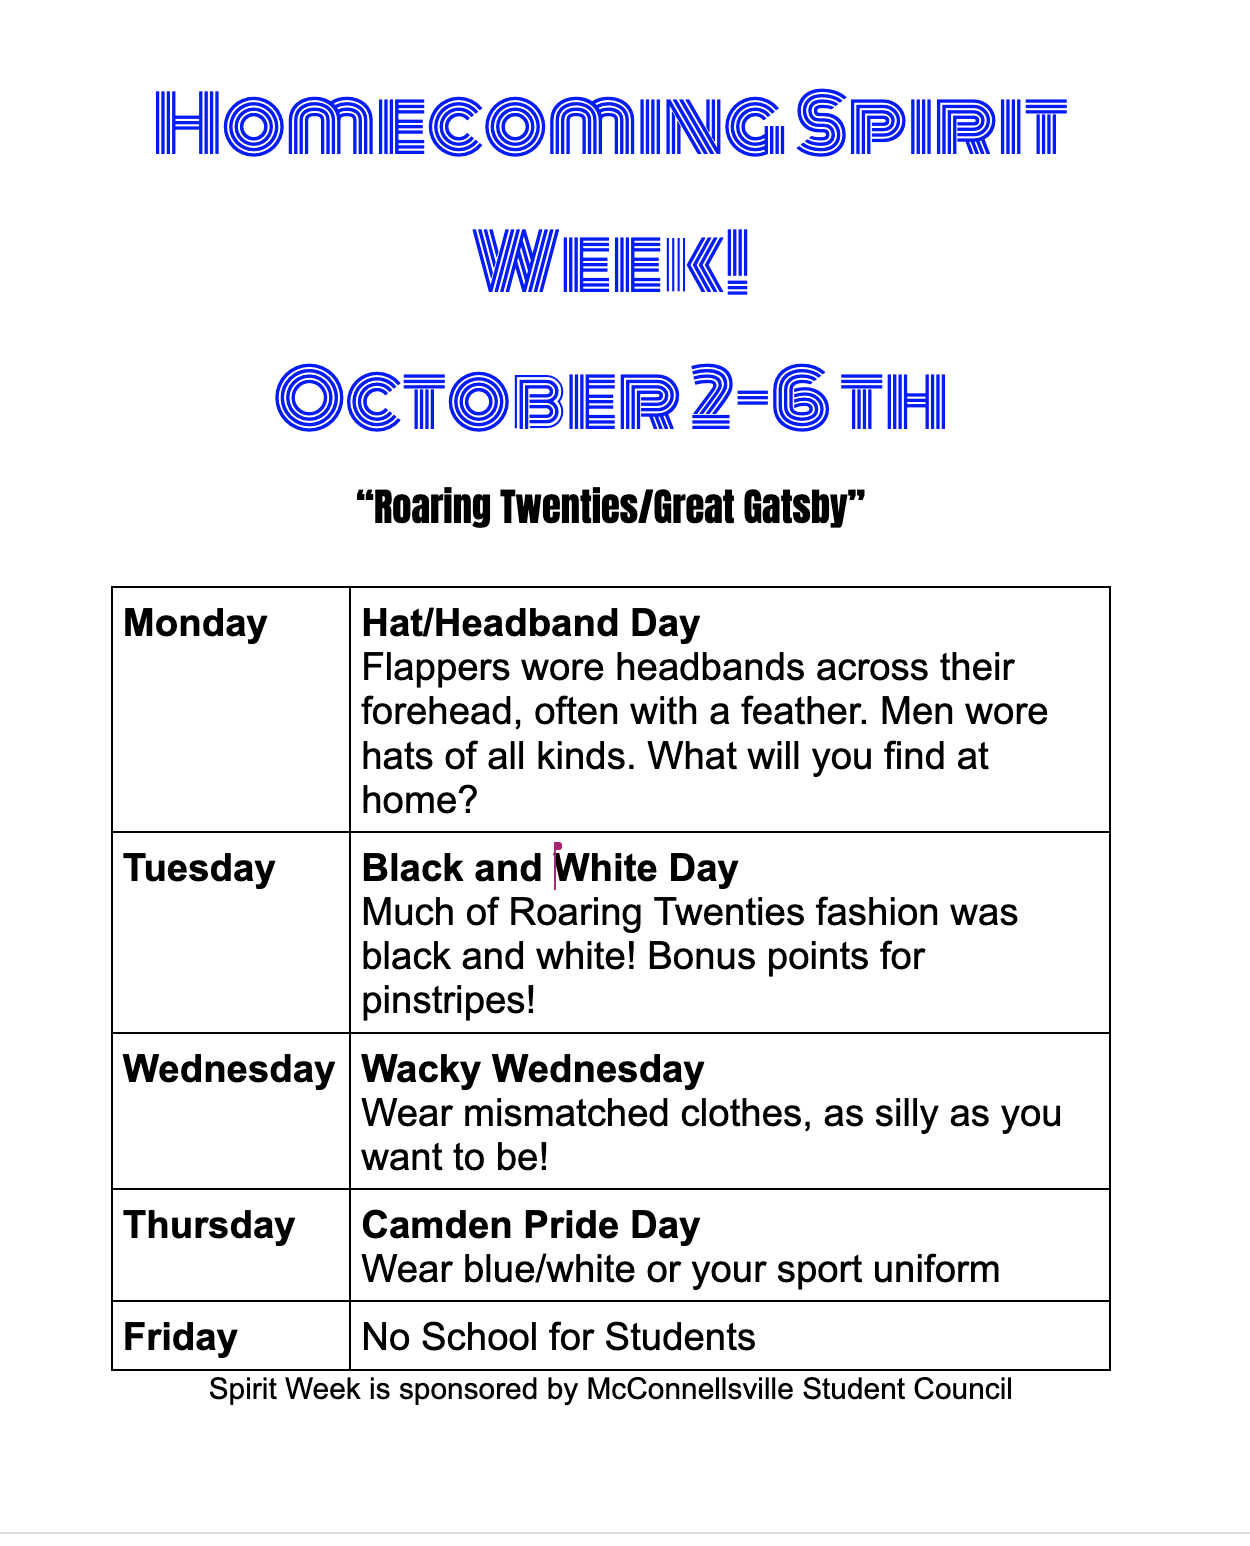 Homecoming Spirit Week at McConnellsville.... Monday Hat Day, Tuesday Black and White Day, Wacky Wednesday, and Camden Pride Day blue/white on Thursday